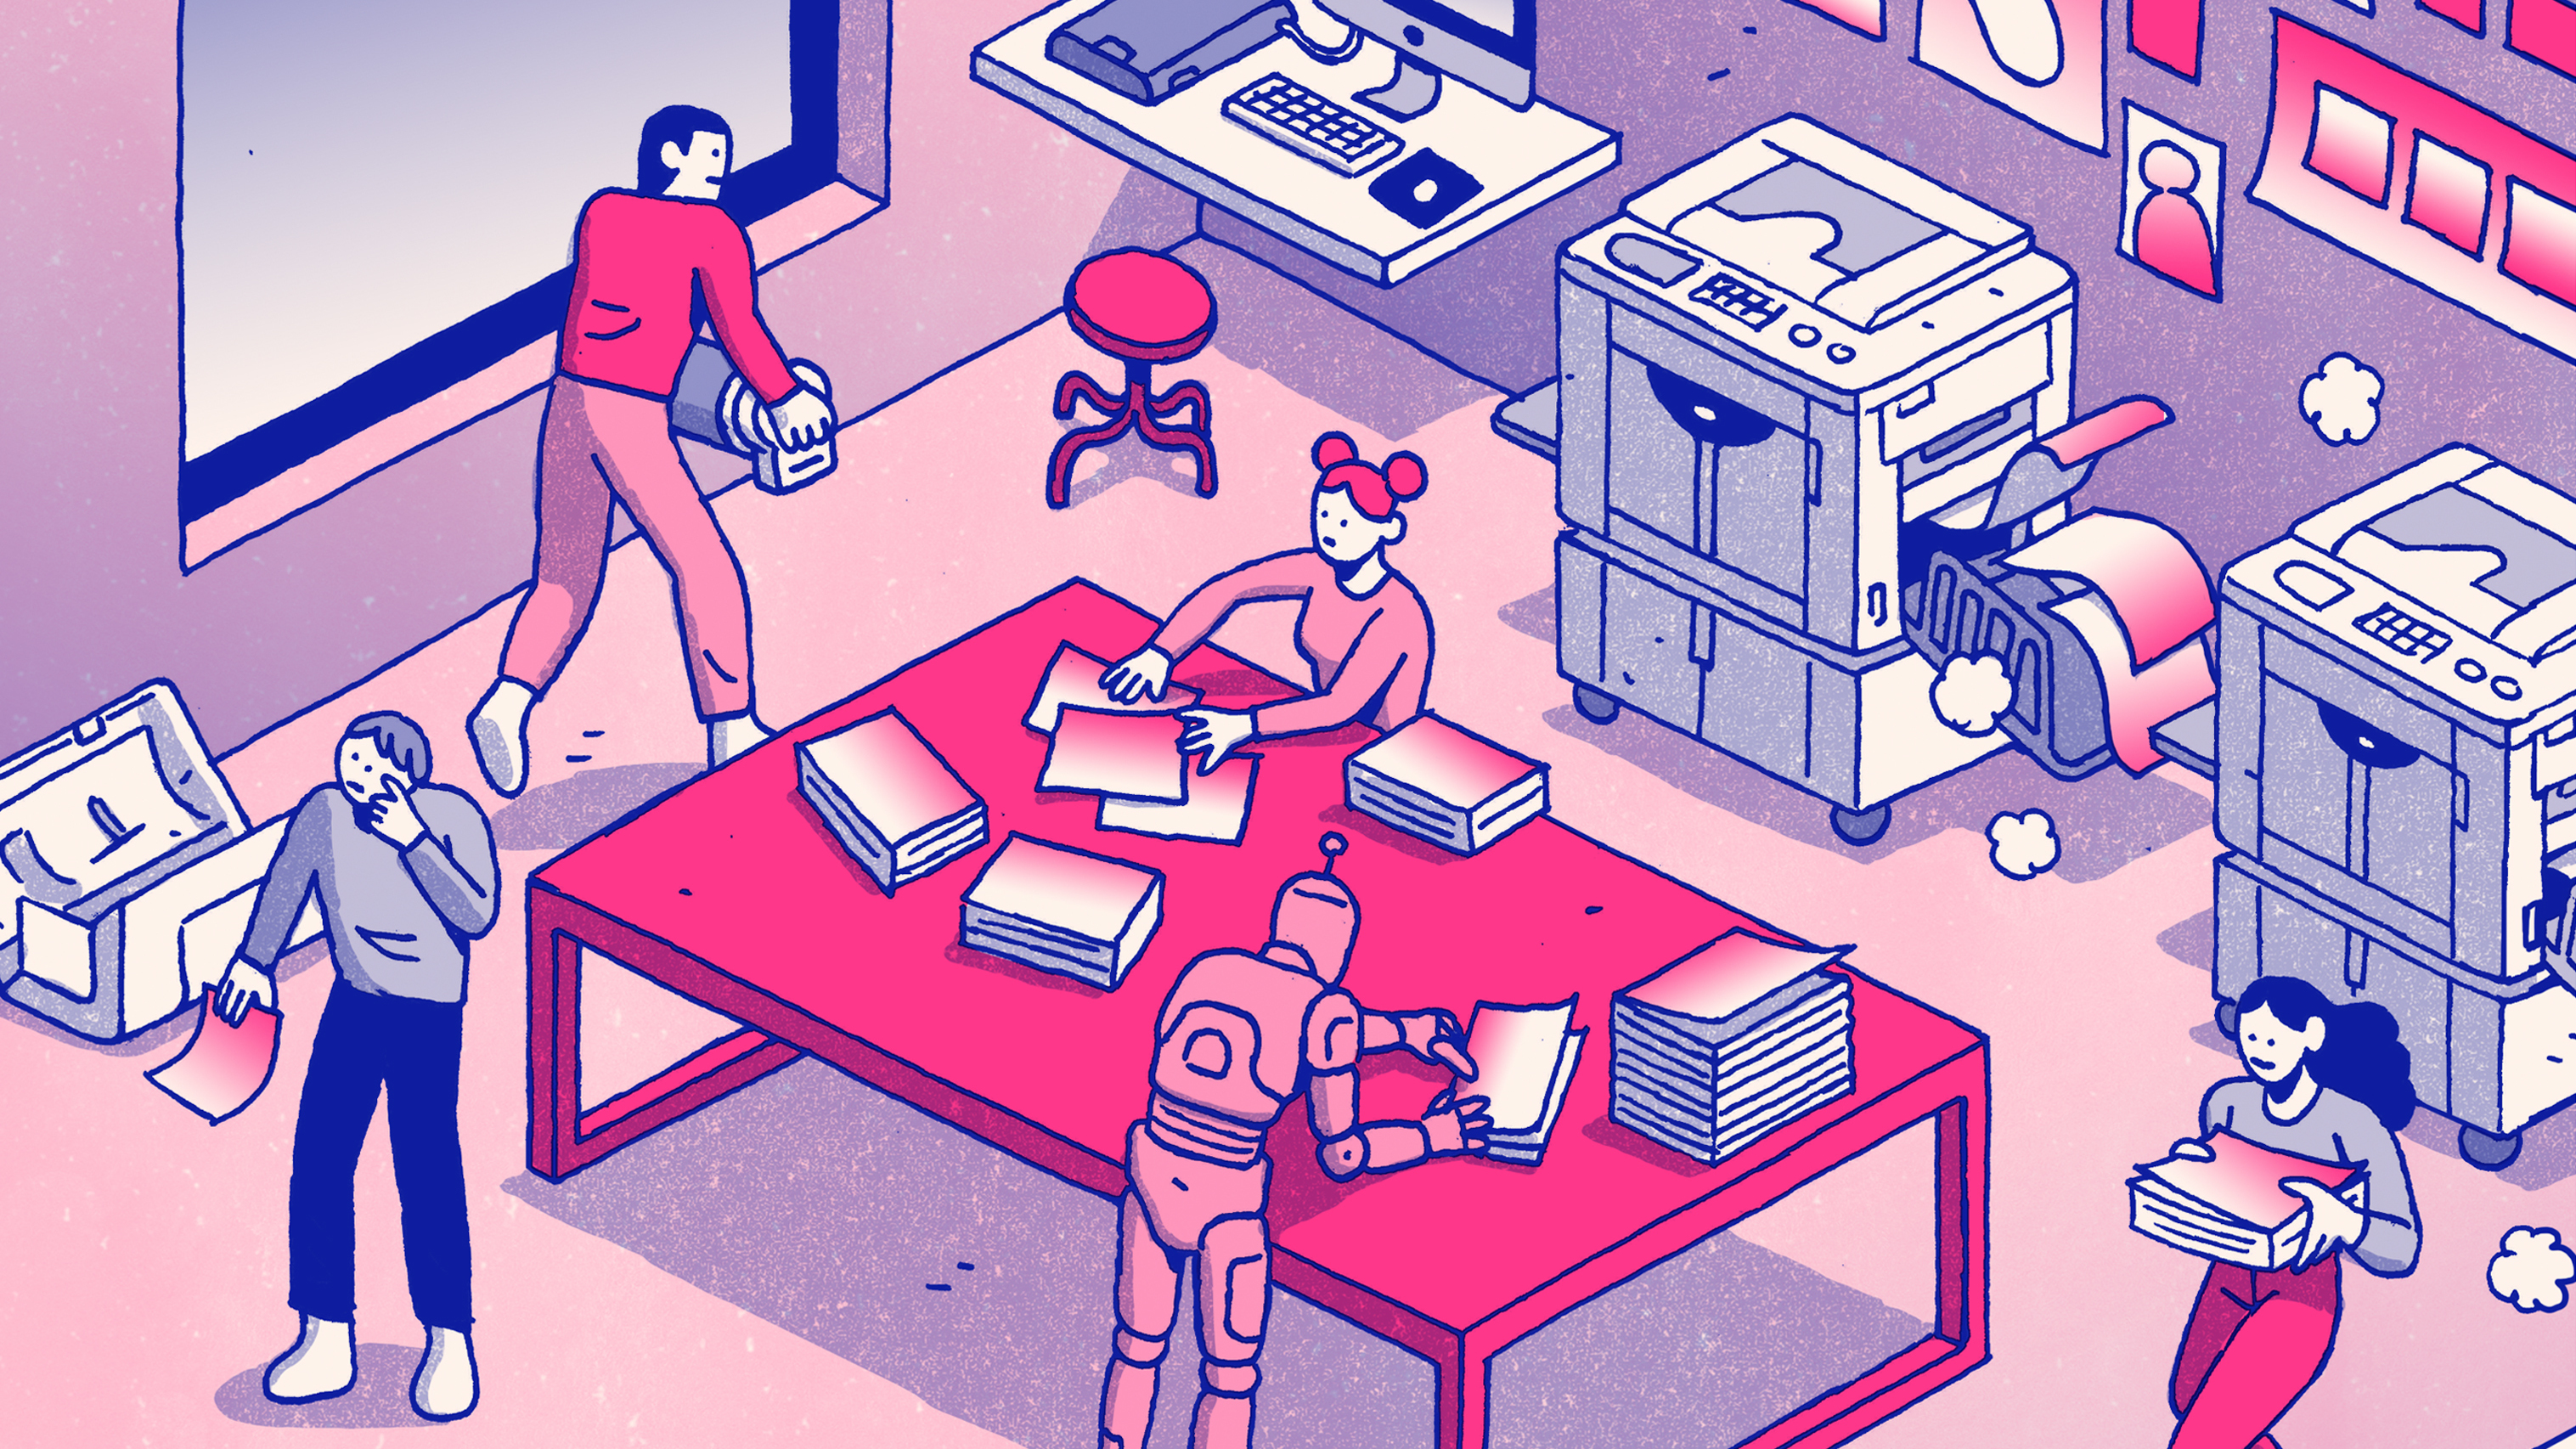 illustration of people working in a printing studio.  Images is in hues of pink and blue.